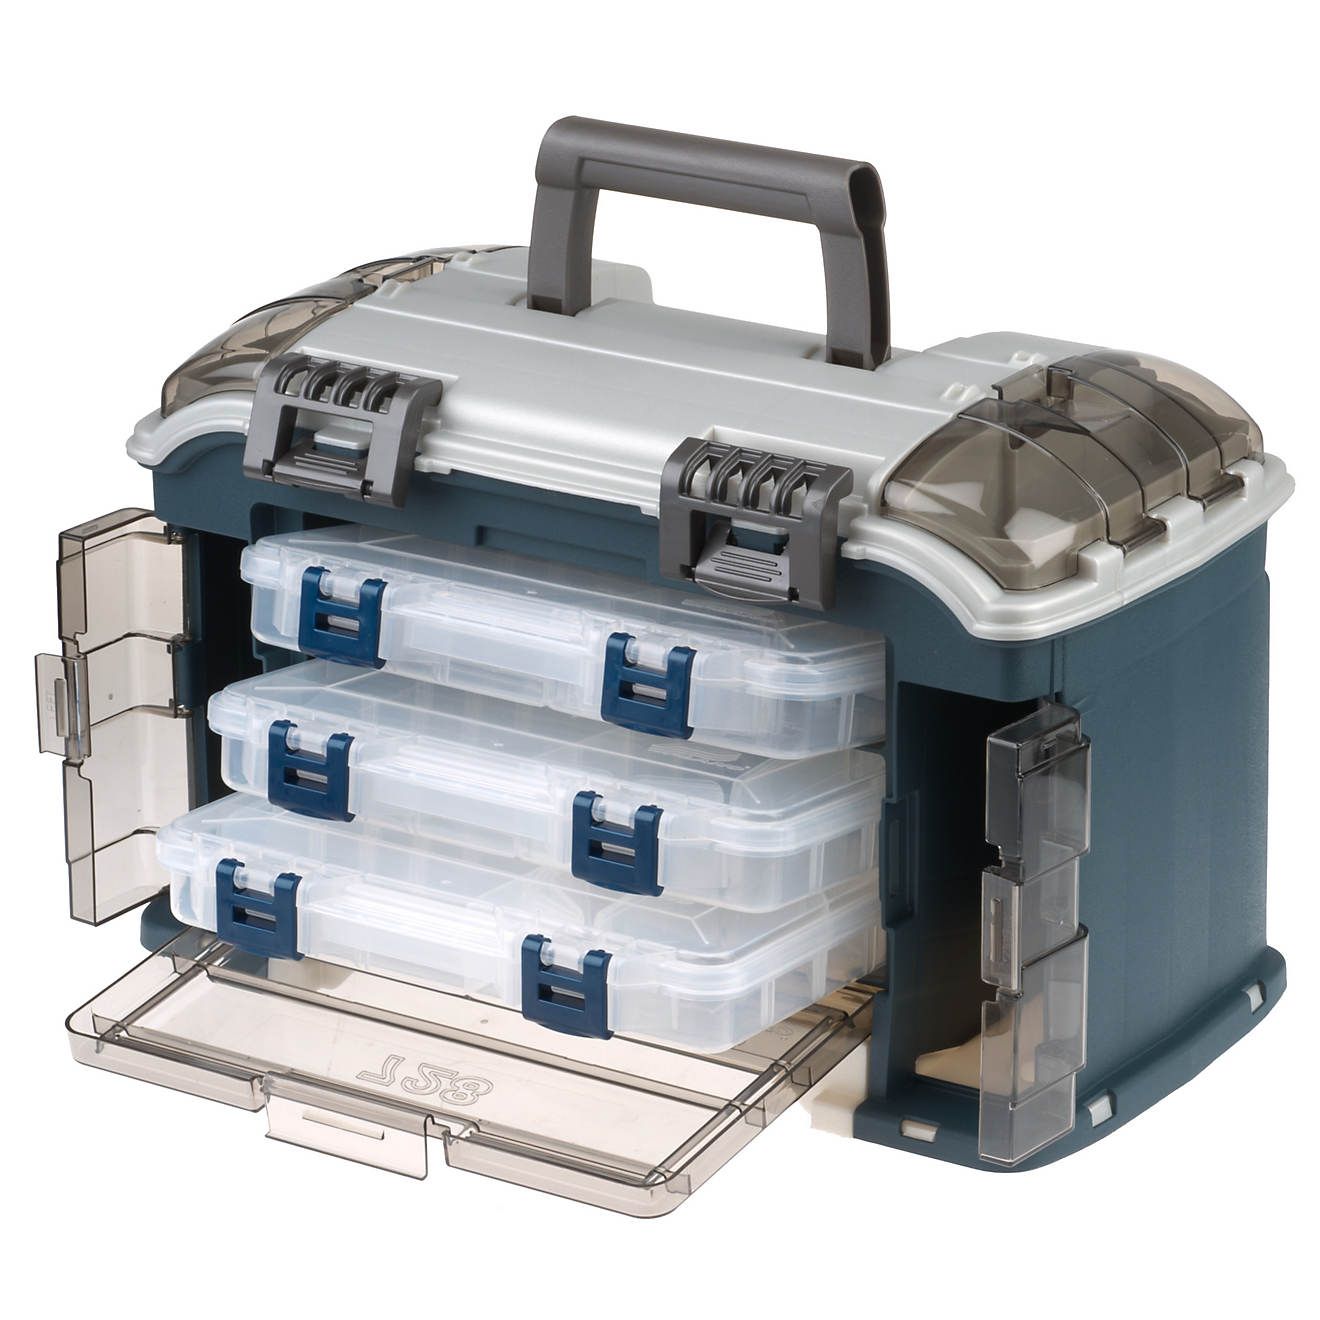 Plano® 728 Angled Tackle System Tackle Box | Academy | Academy Sports + Outdoors